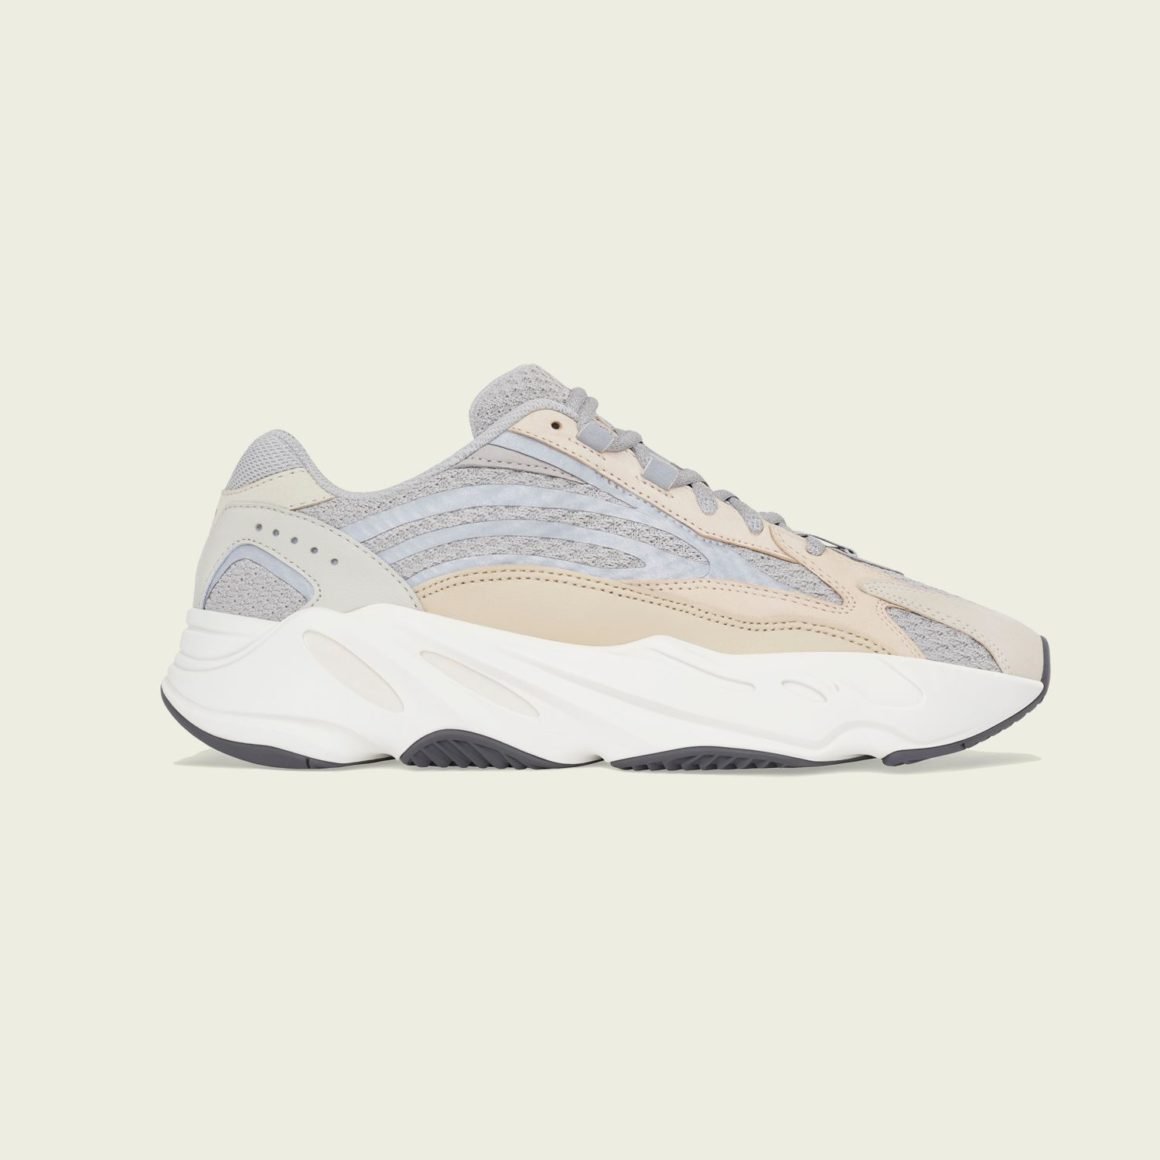 adidas-yeezy-700-boost-v2-GY7924-release-2021